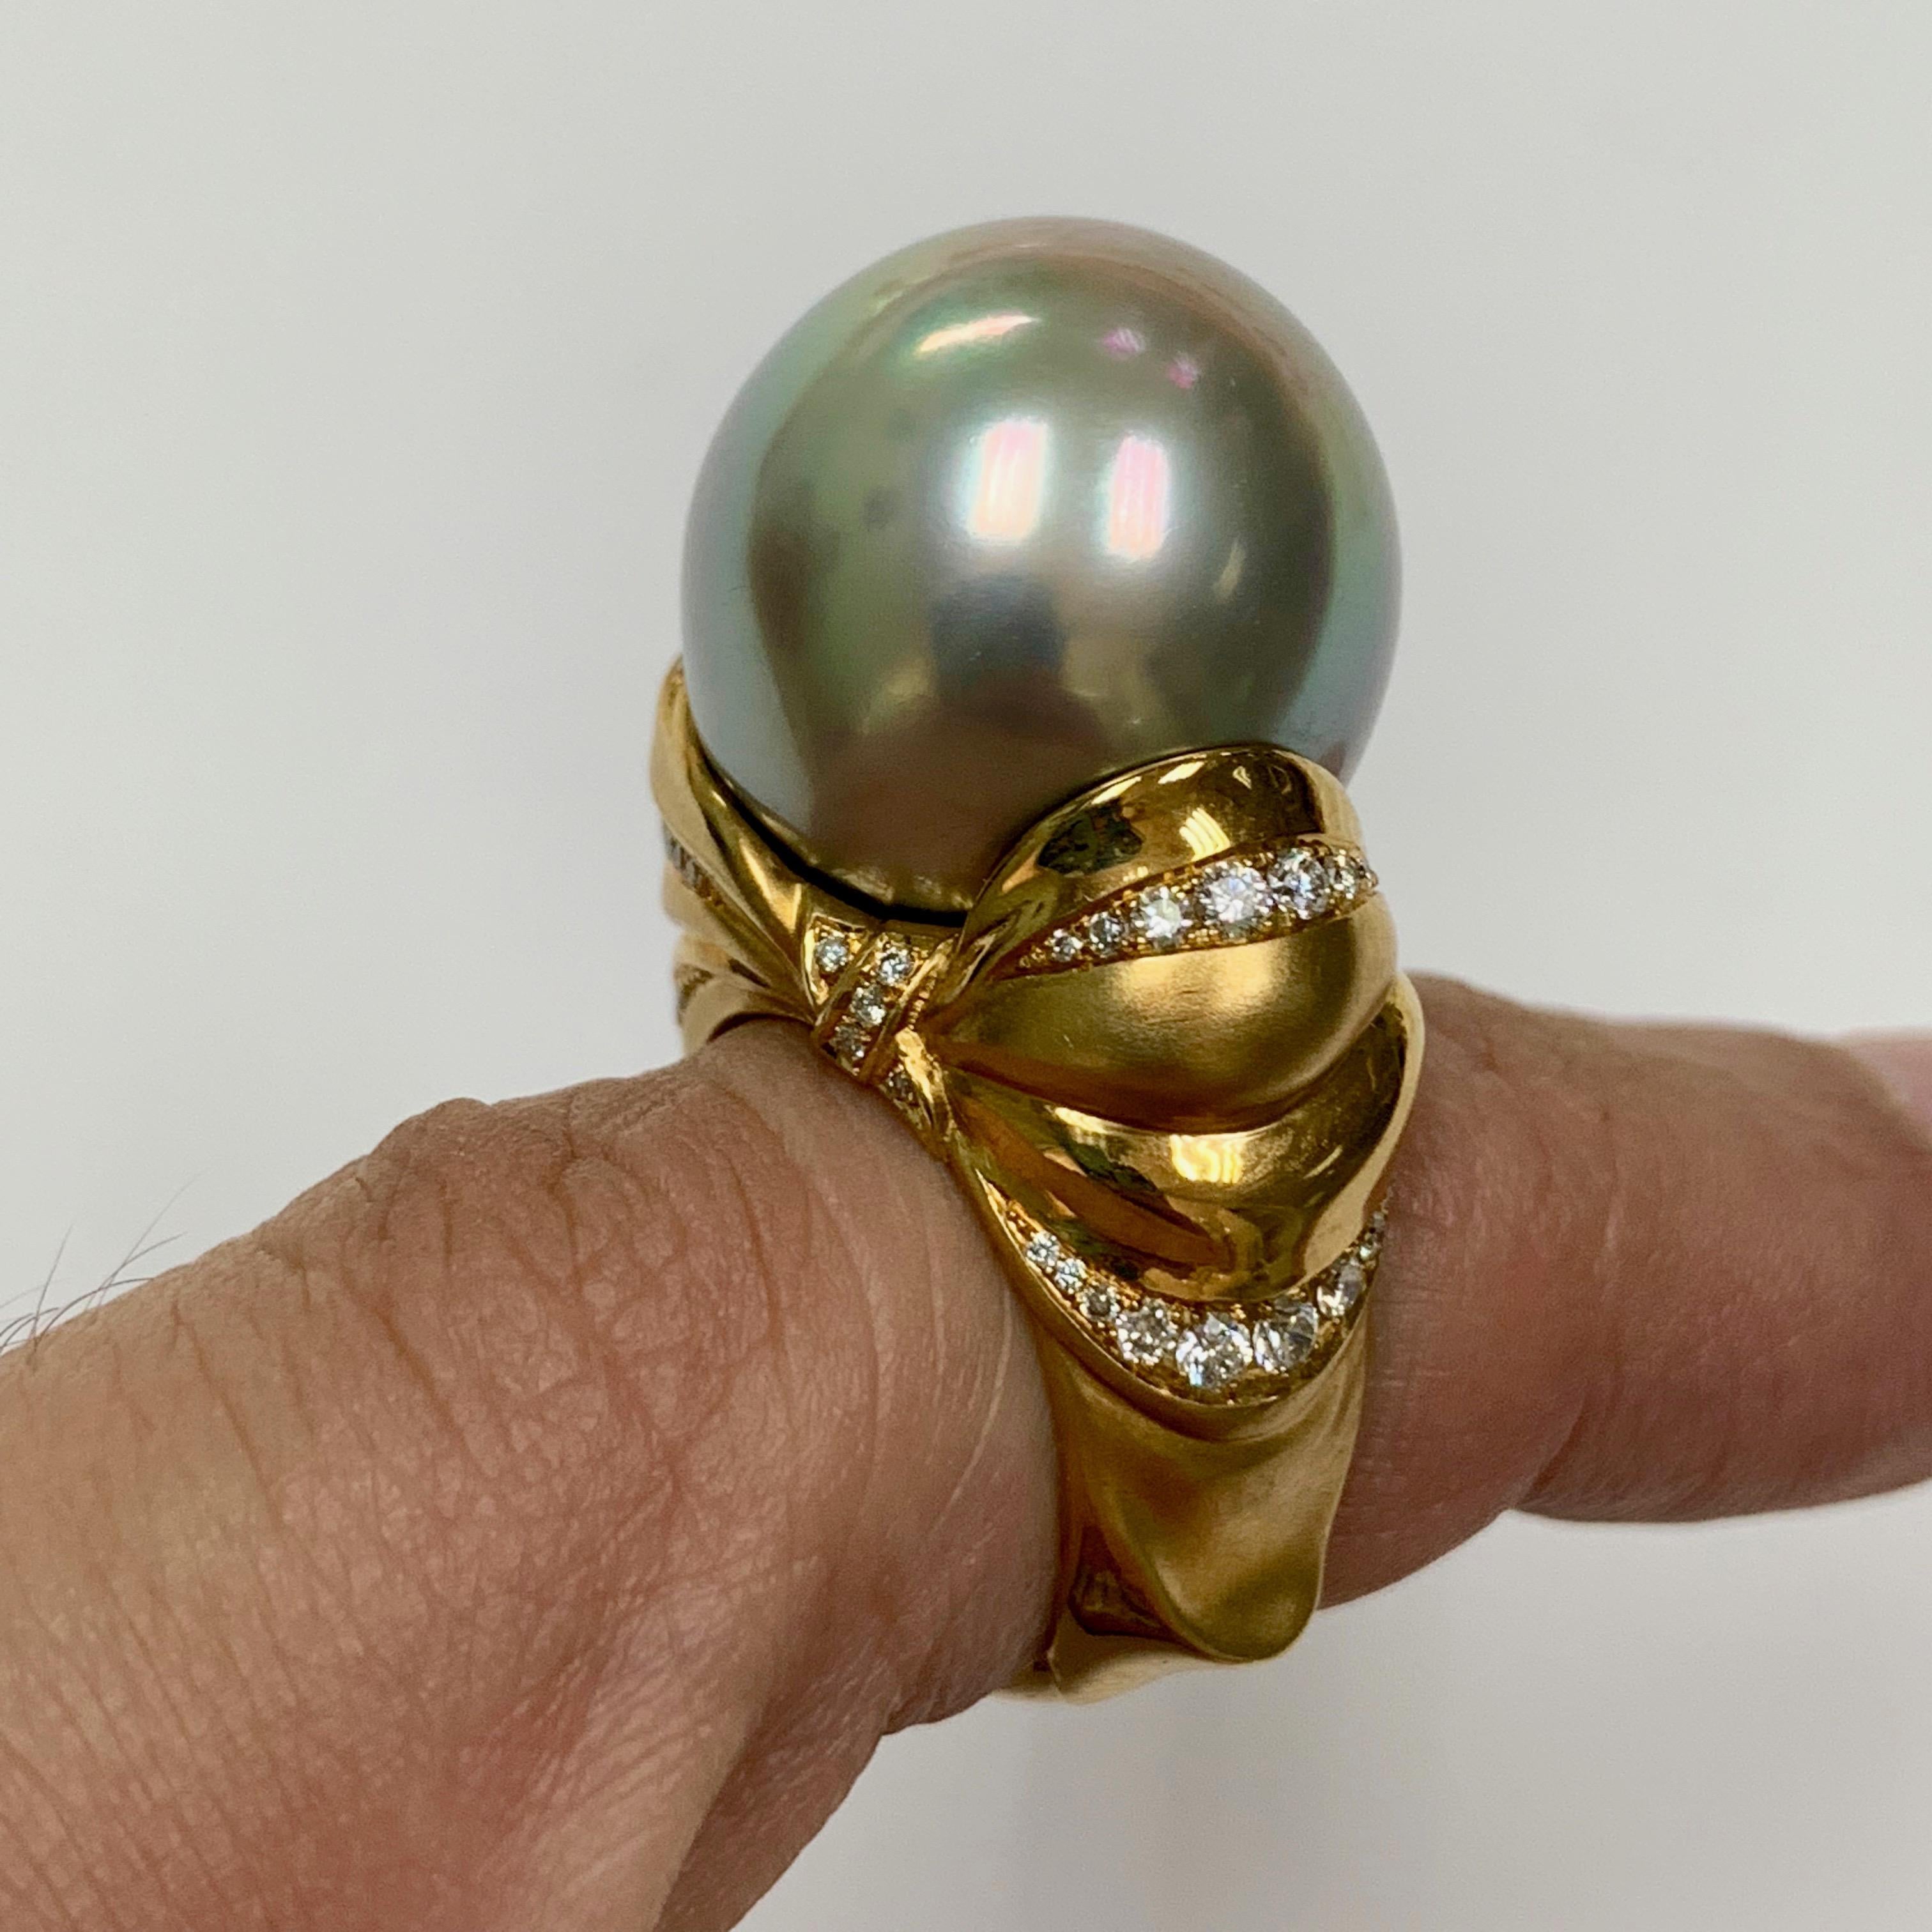 Diamond Mocca Color Tahiti Pearl 18 Karat Yellow Gold Bow Ring

Very rare combination of color and size of the Pearl. Unusual Mocca Color Tahiti Pearl with impressive size of 17mm. Do not miss the design of this masterpiece. Lush and weightless Bow